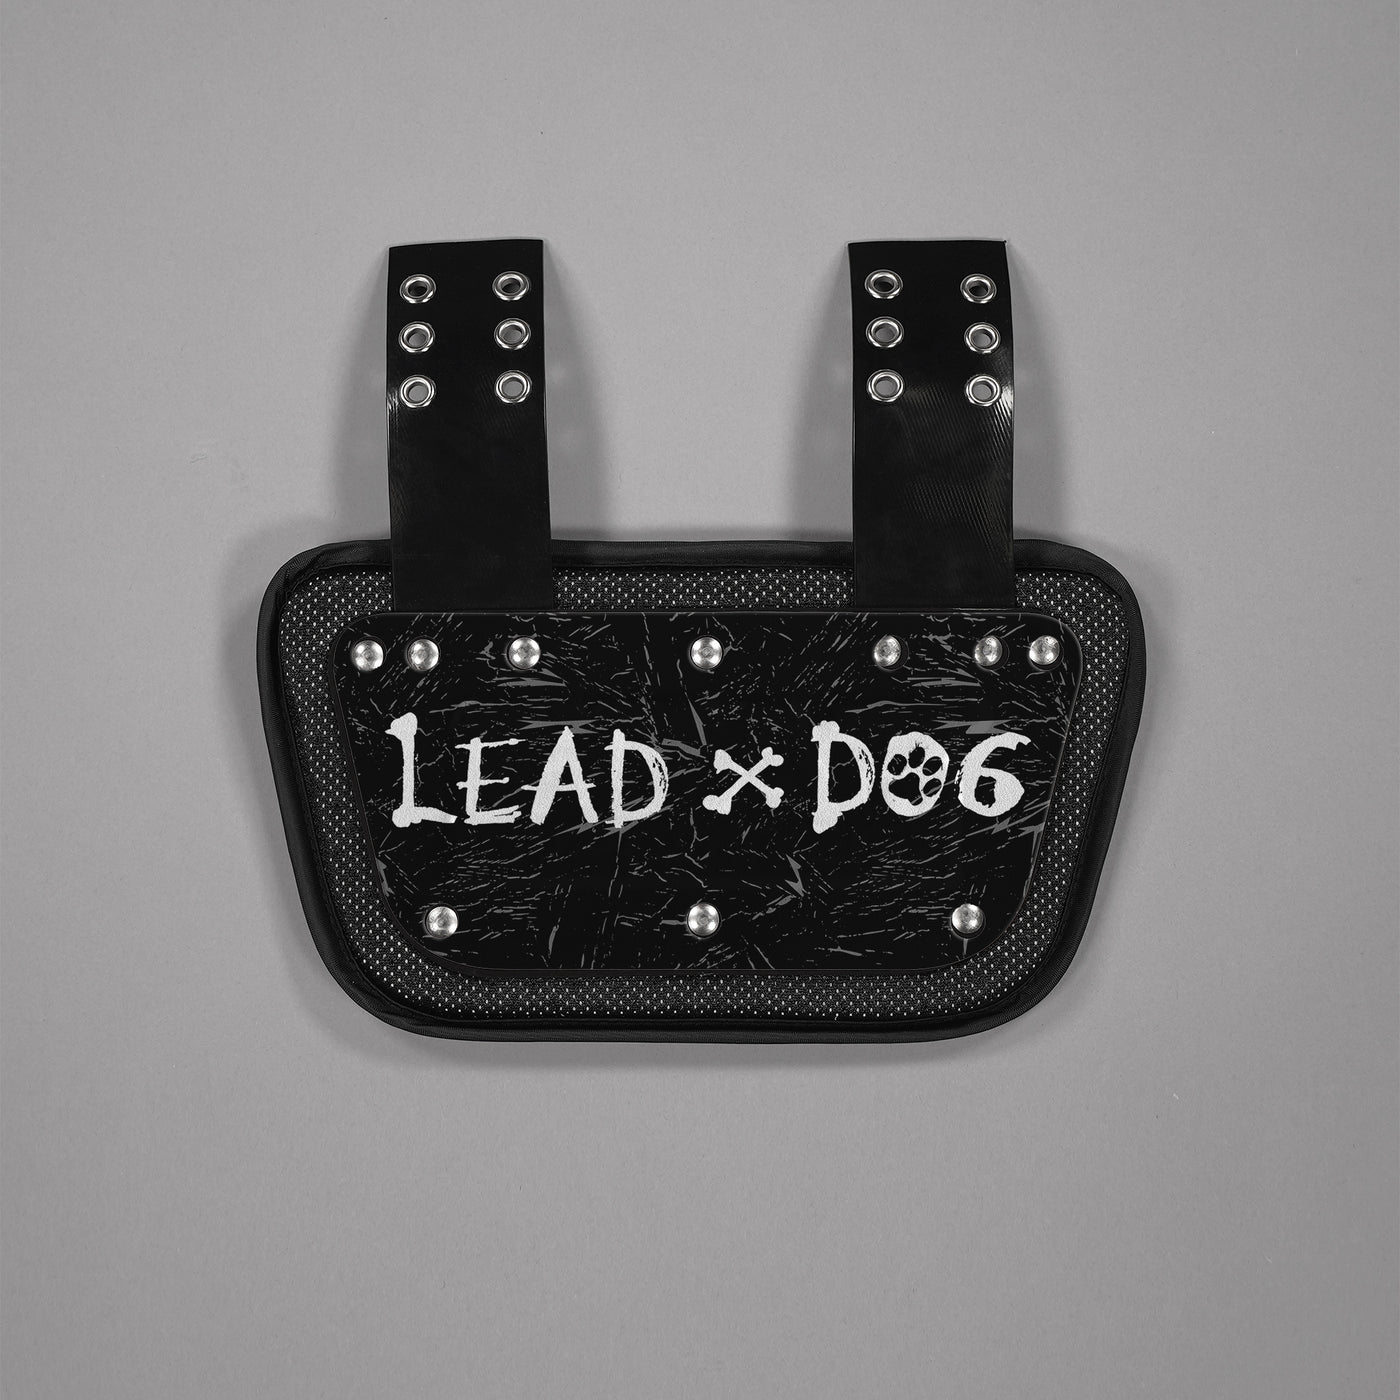 Lead X Dog Sticker for Back Plate